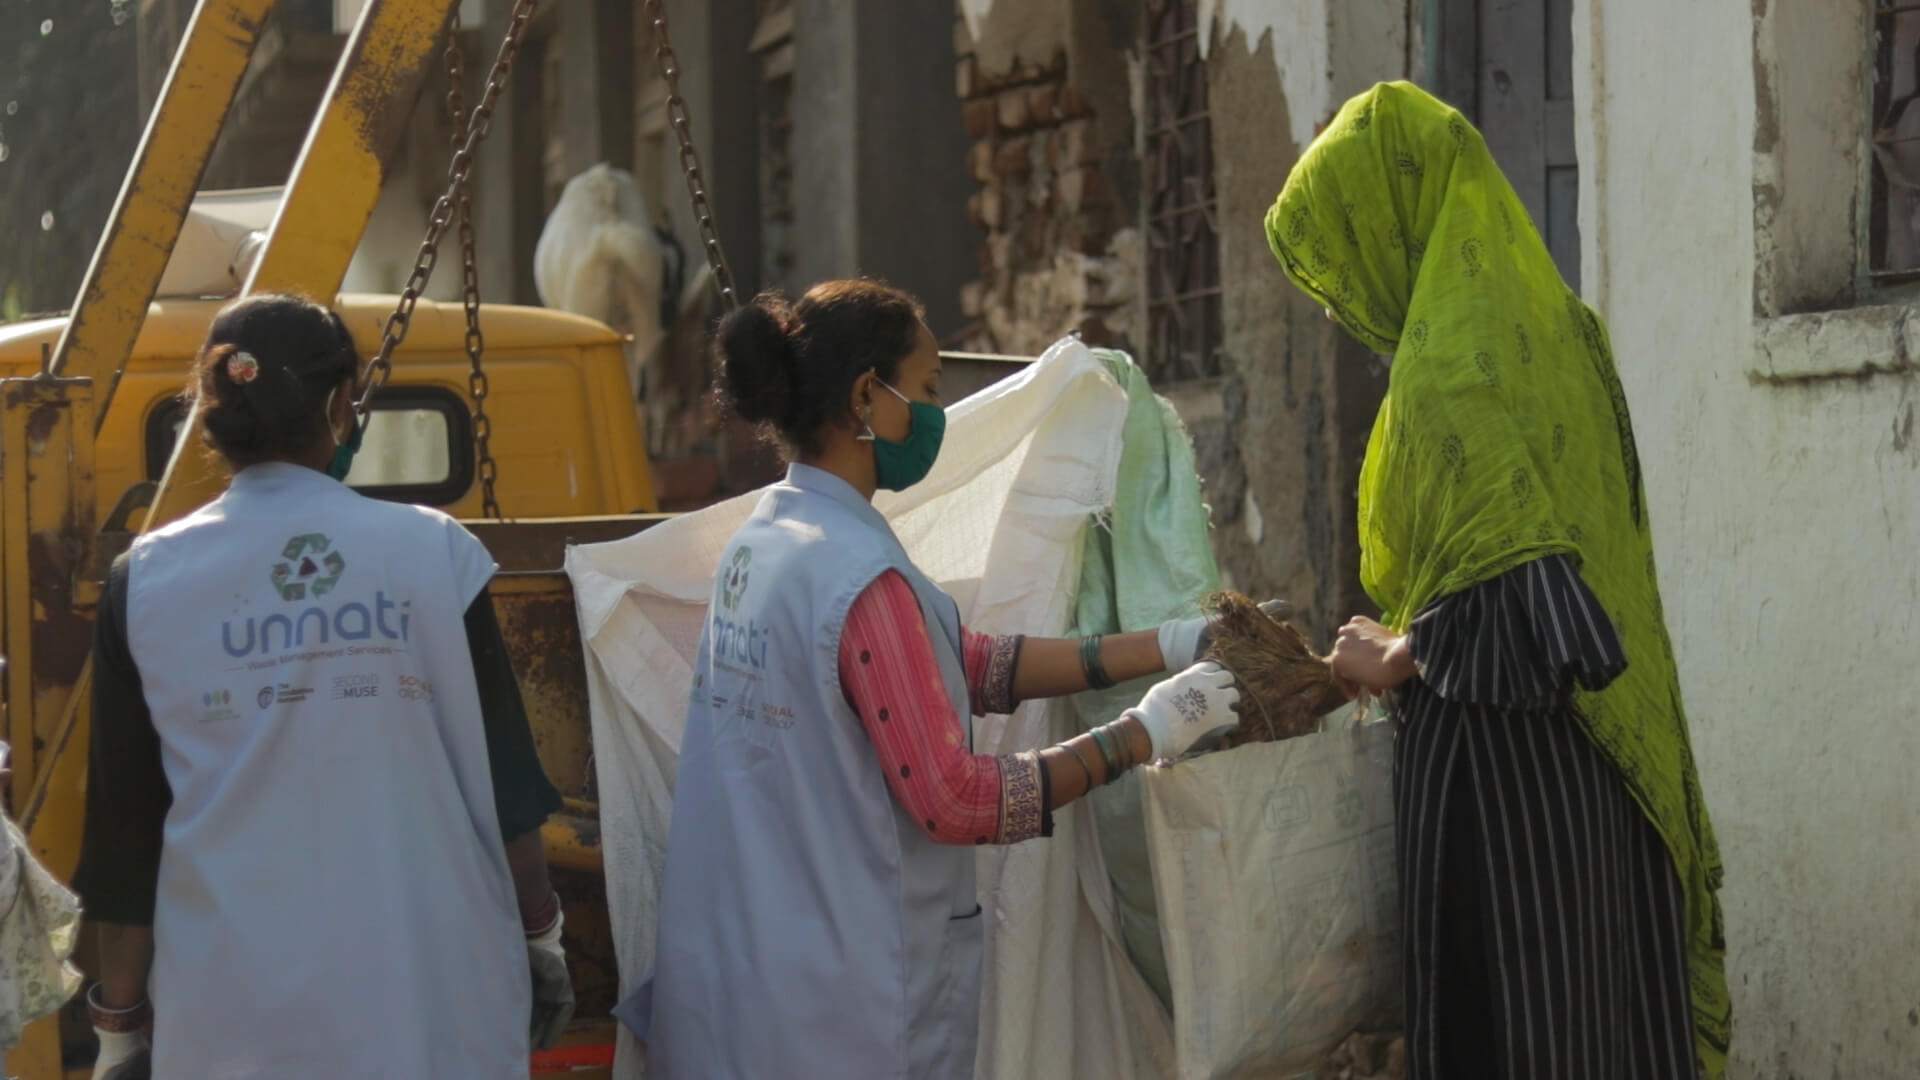 Two Unnati members collecting waste from a resident